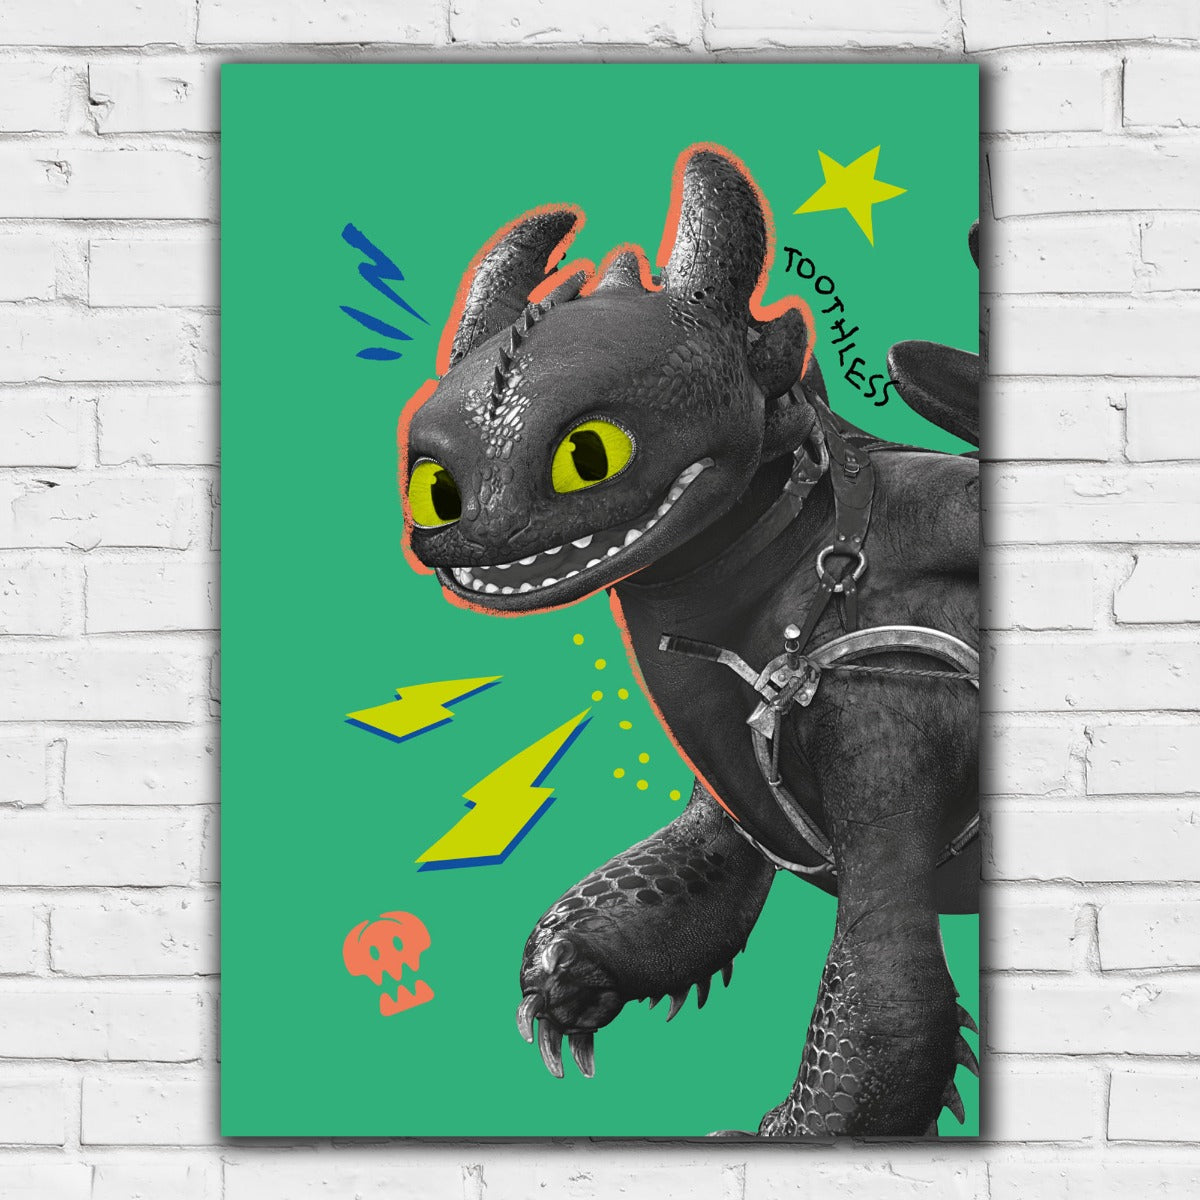 How To Train Your Dragon Print - Toothless Green Funky Print